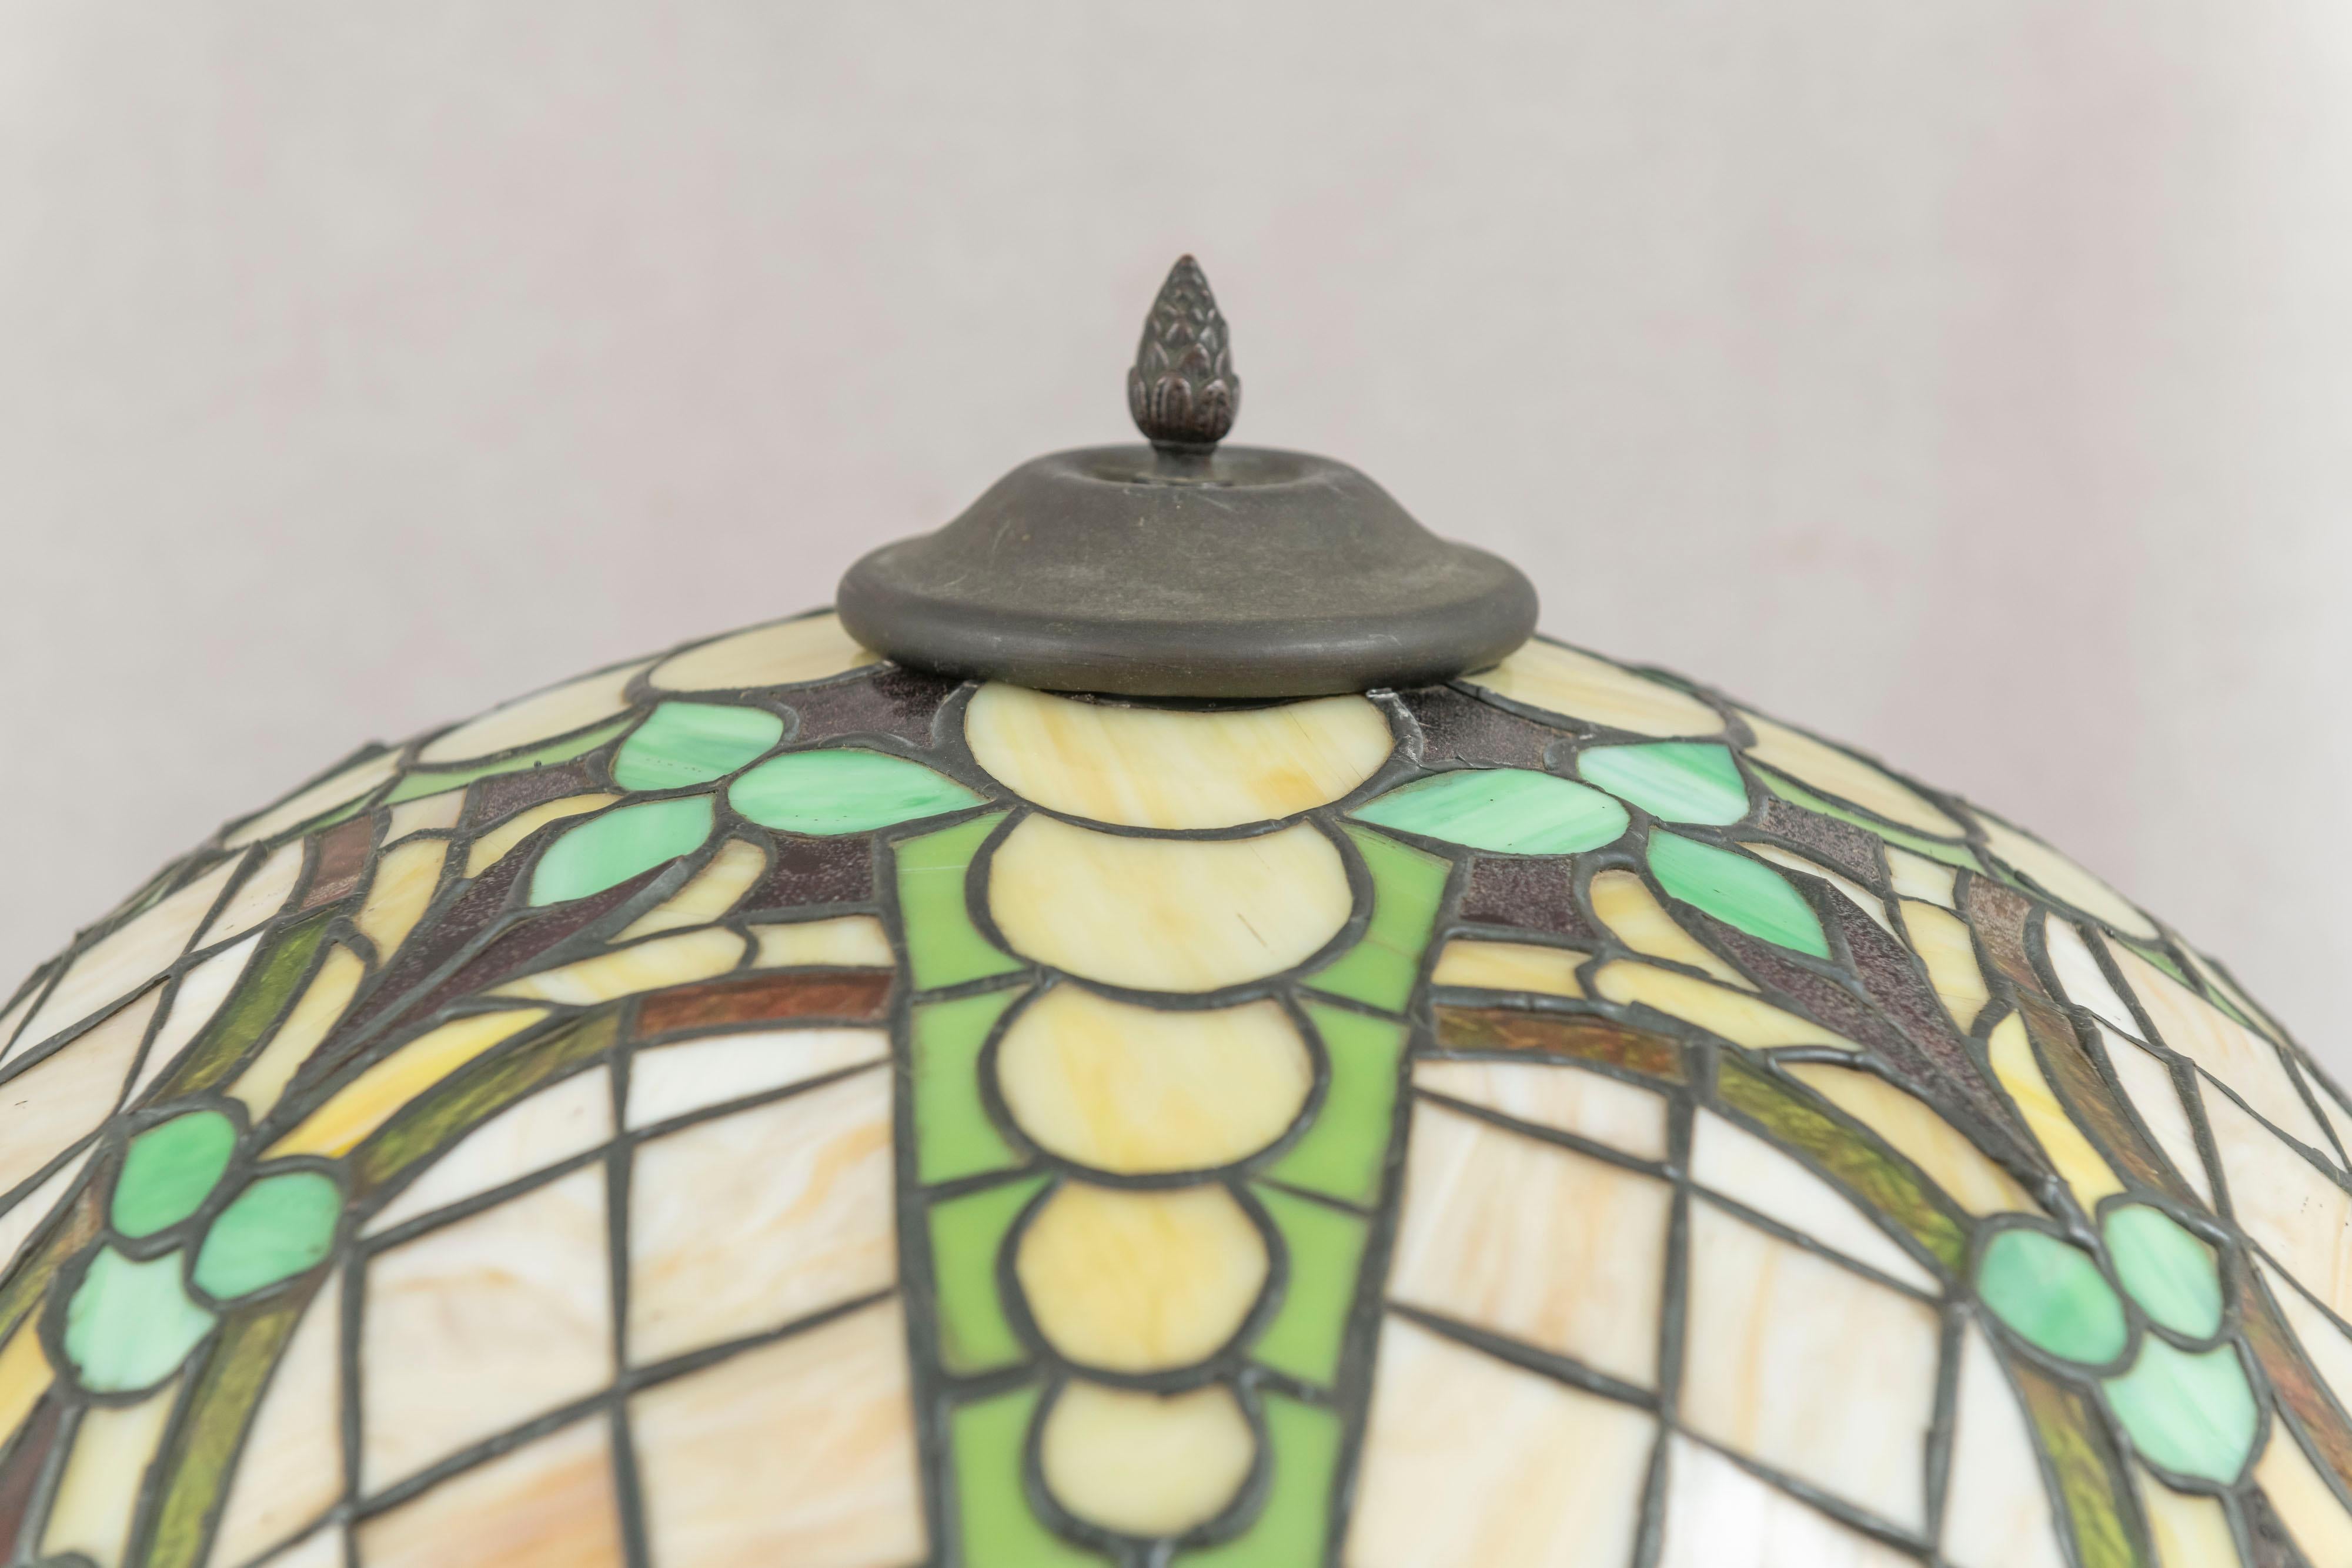 Antique Art Nouveau Leaded Glass Table Lamp by Chicago Mosaic, ca. 1910 In Good Condition For Sale In Petaluma, CA